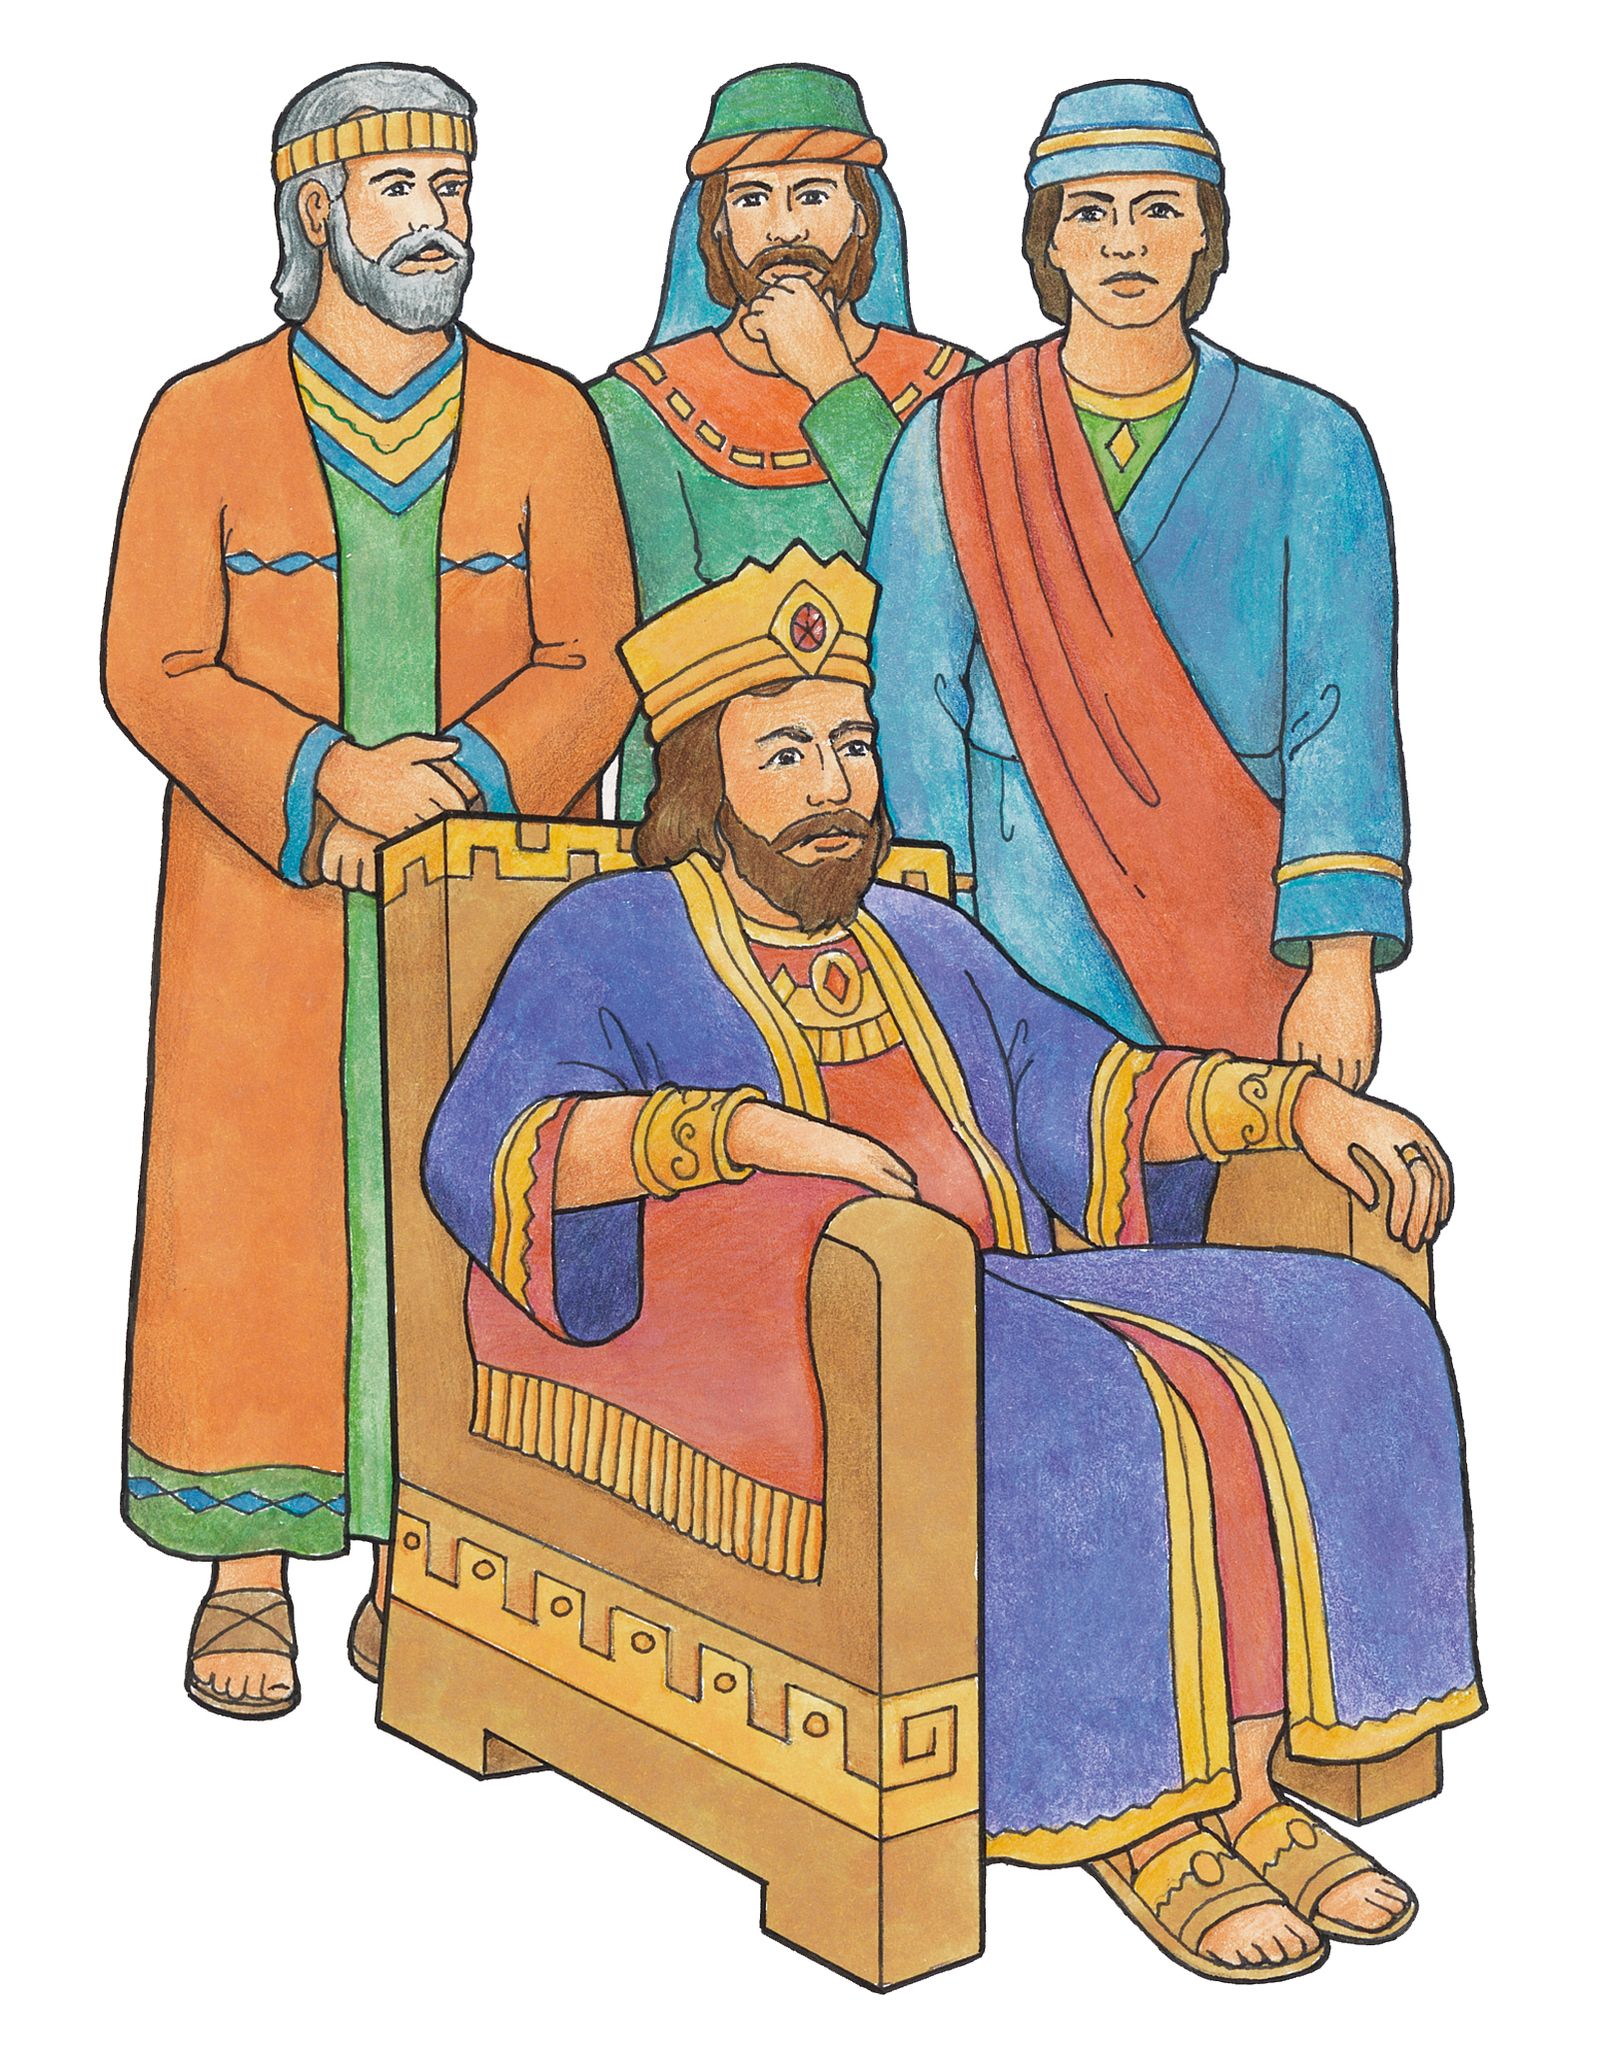 King Noah sits on his throne with three of his priests standing around him.